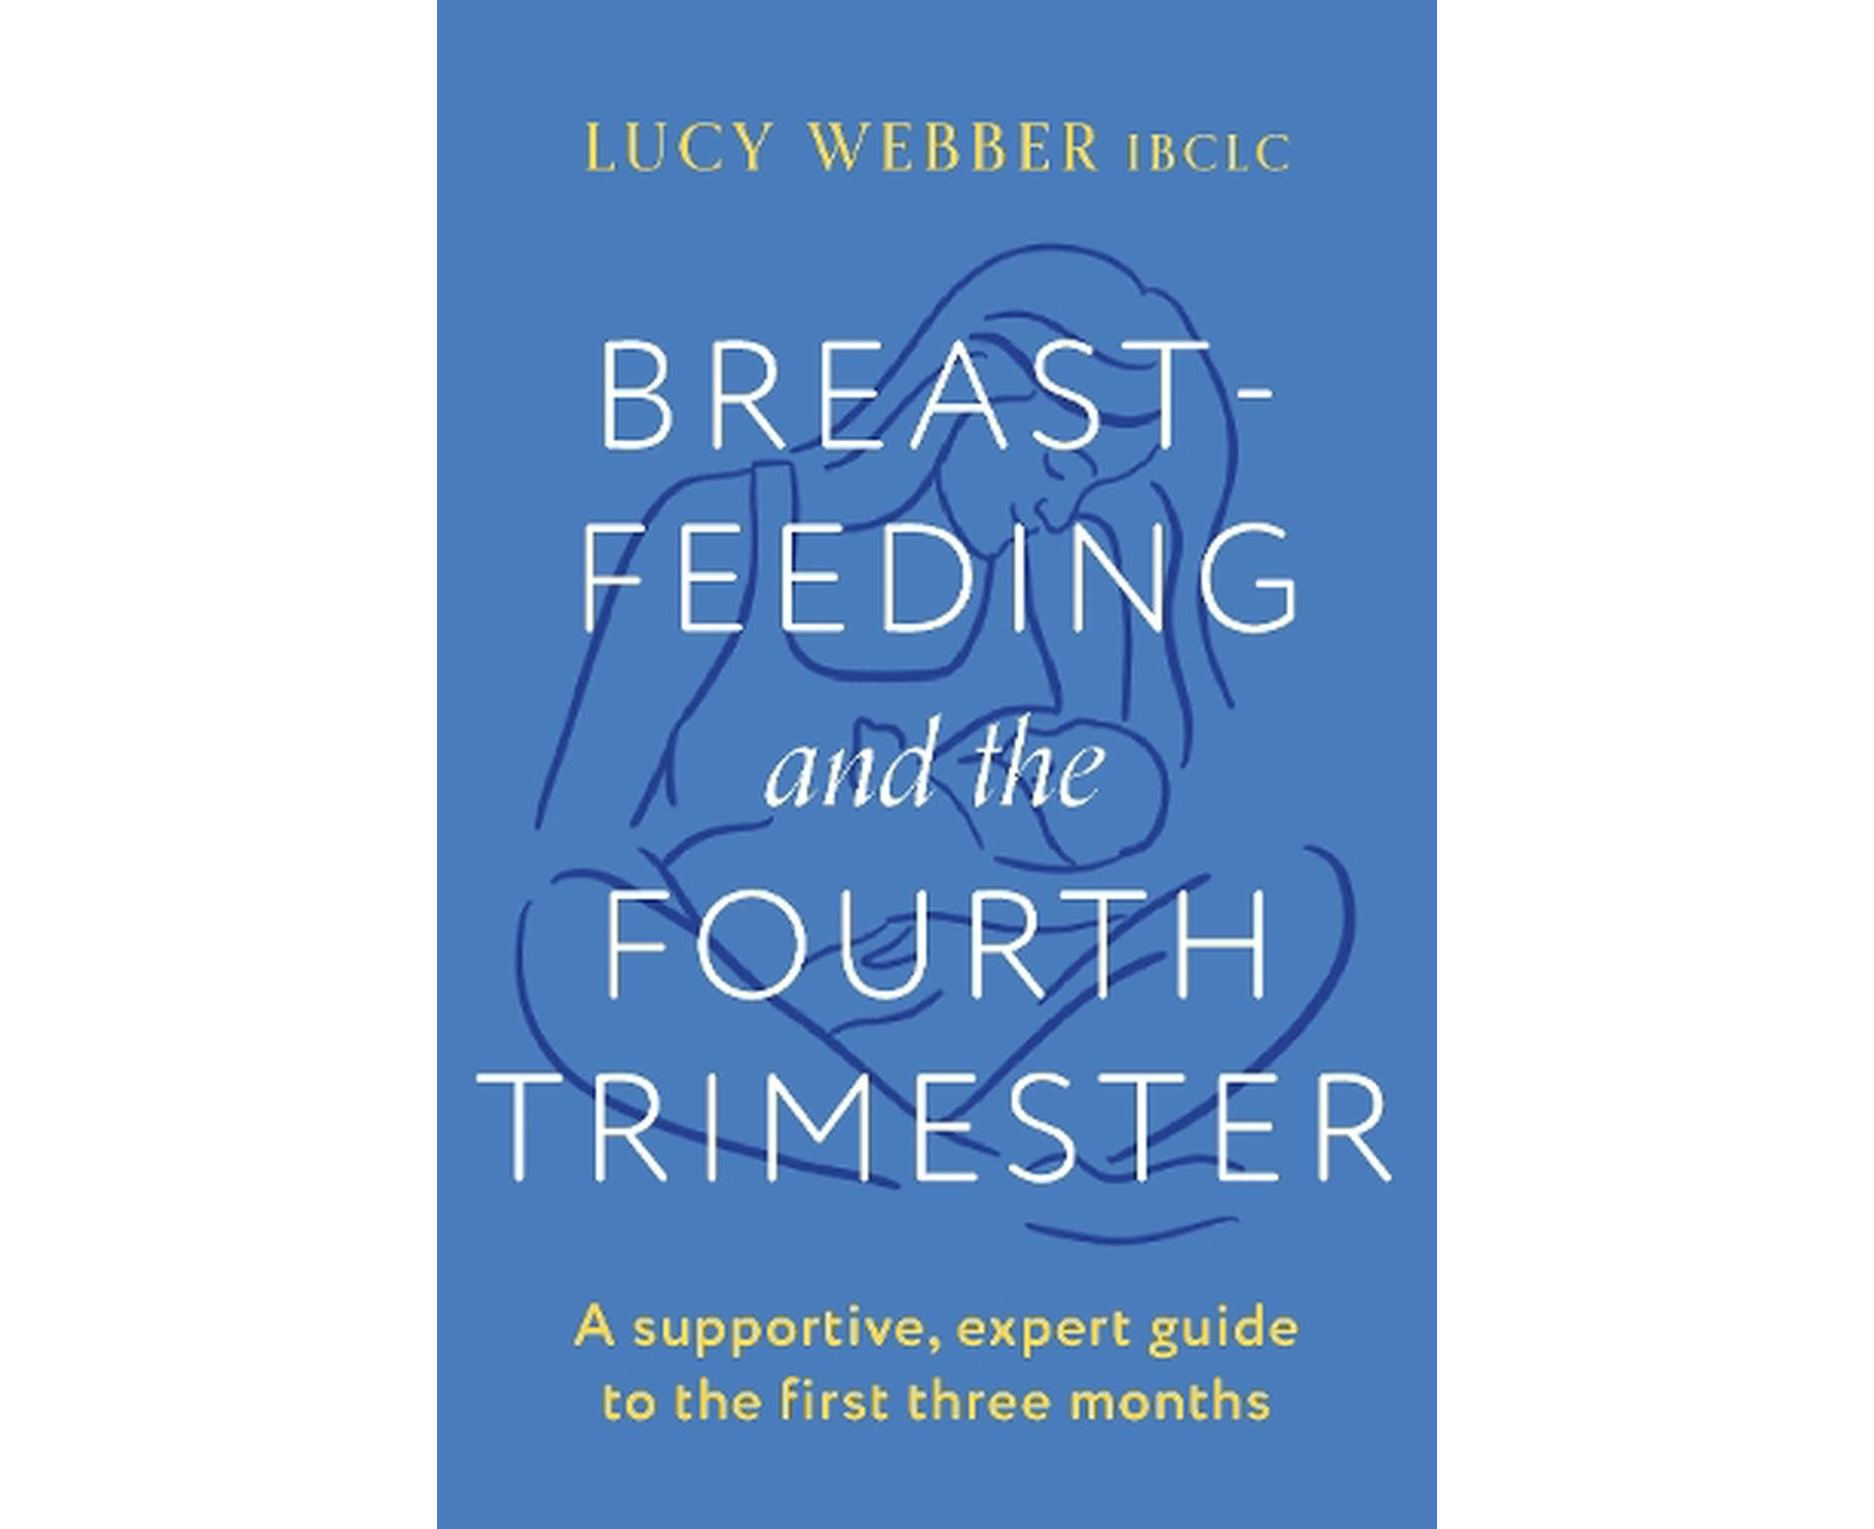 The Fourth Trimester Guide